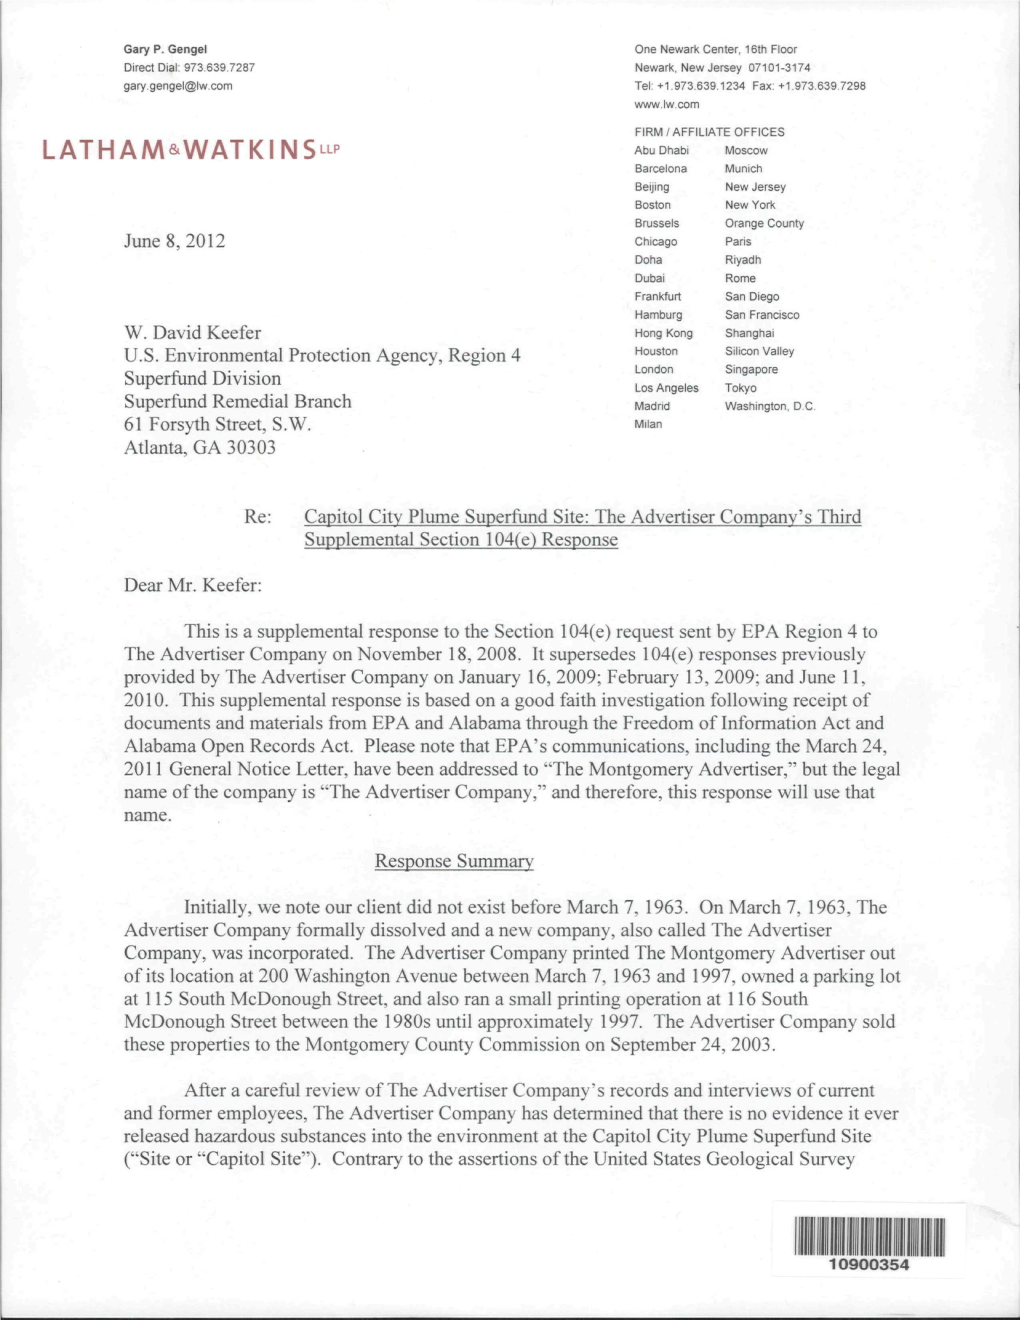 Letter from Gary Gengel, Lathan & Watkins to W. David Keefer, Usepa. Subject: the Advertiser Company's Third Supplement